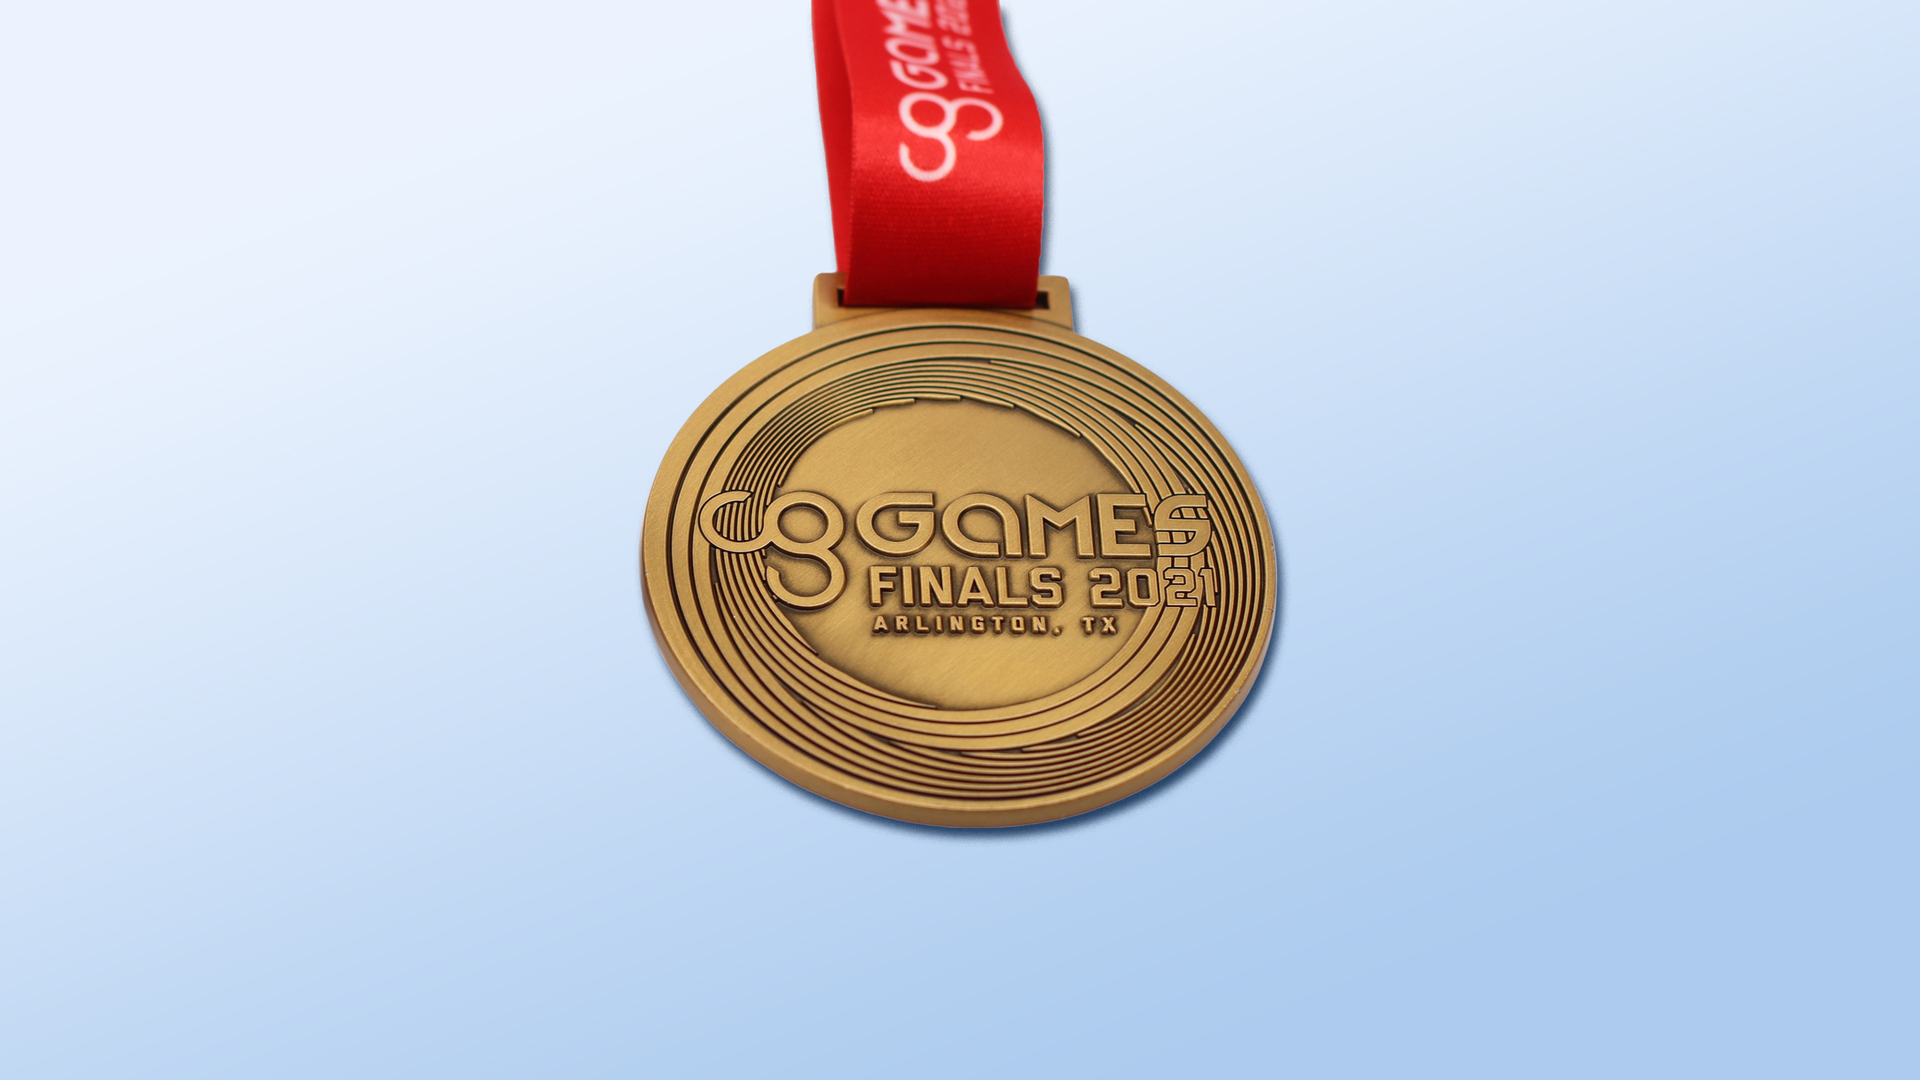 CGGames_medal_frontOnly_blue